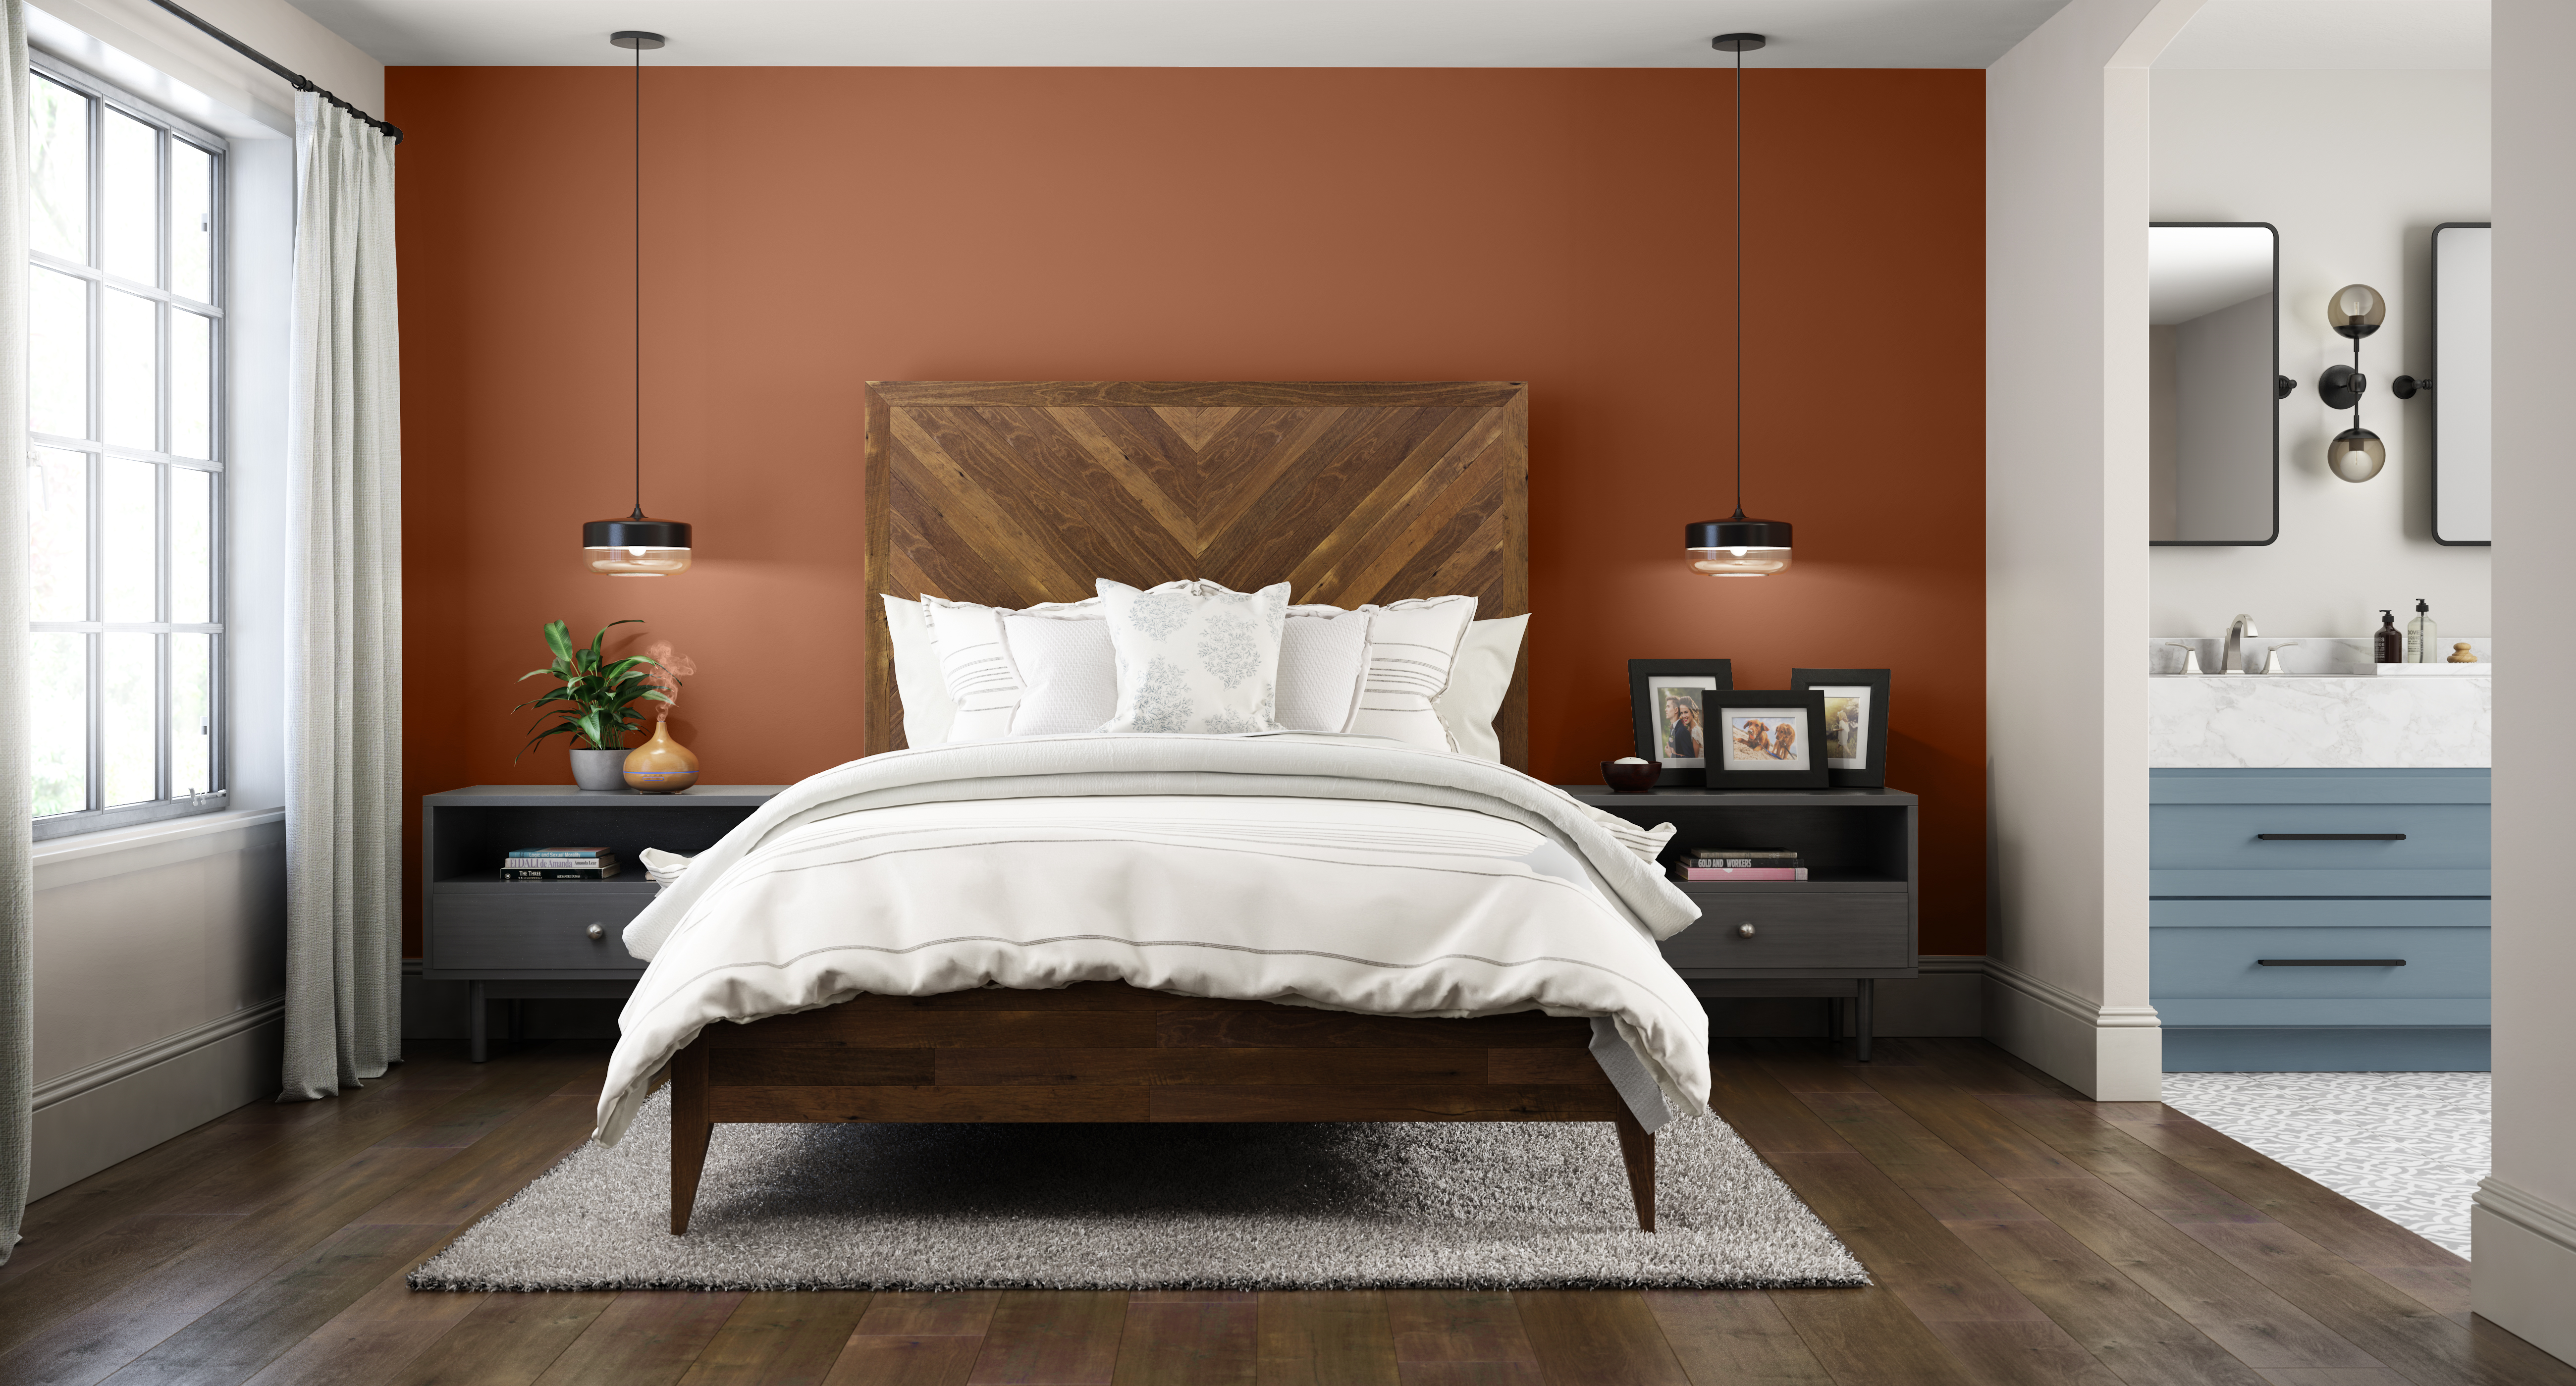 An industrial modern bedroom with an accent wall in the colour Orange Flambe